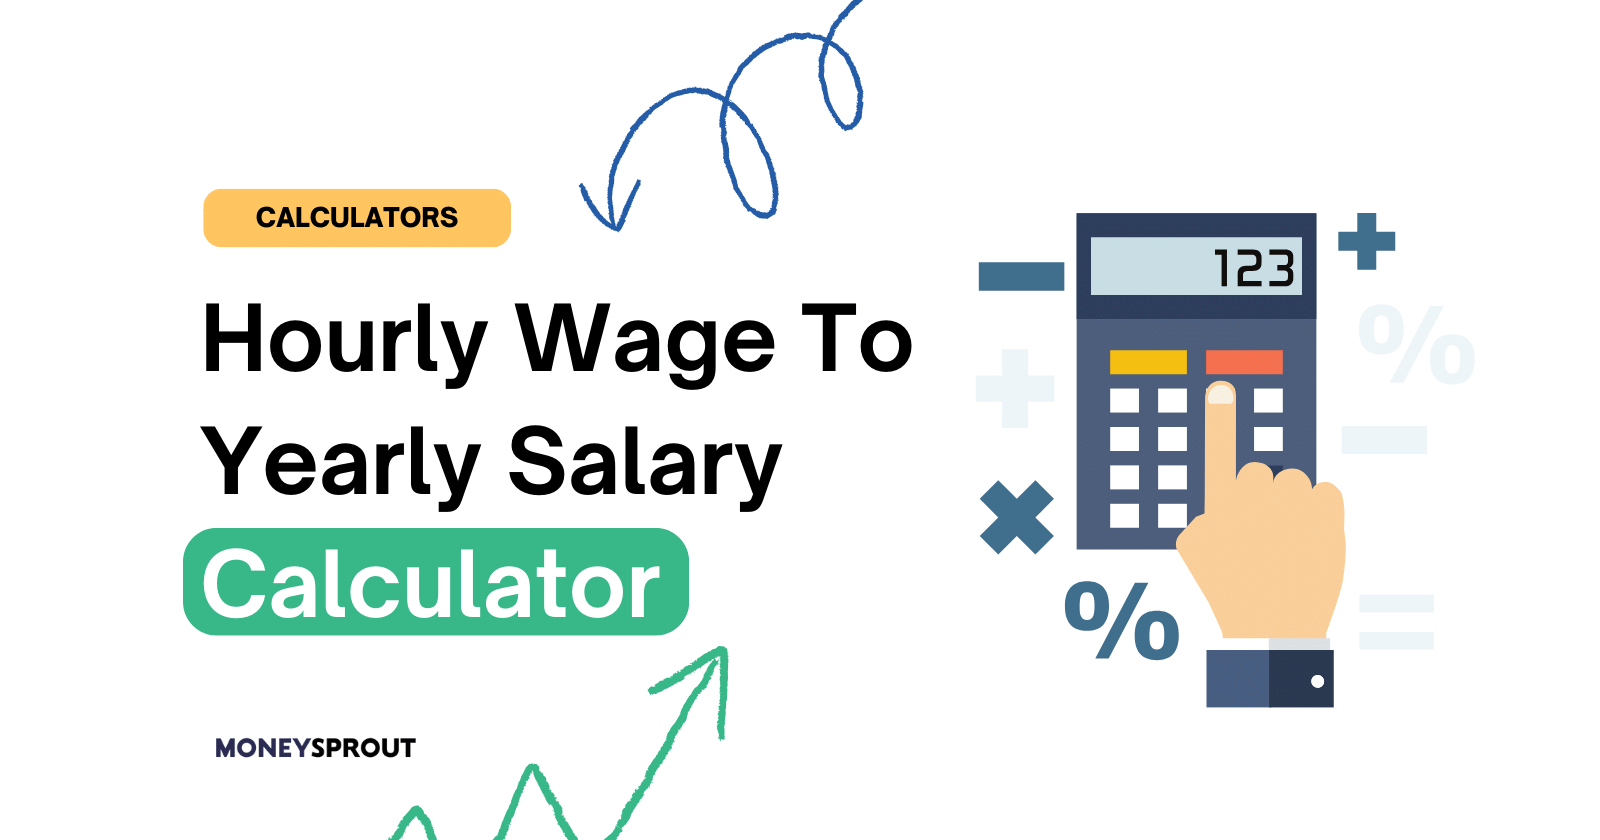 Hourly Wage To Yearly Salary Calculator UK Money Sprout